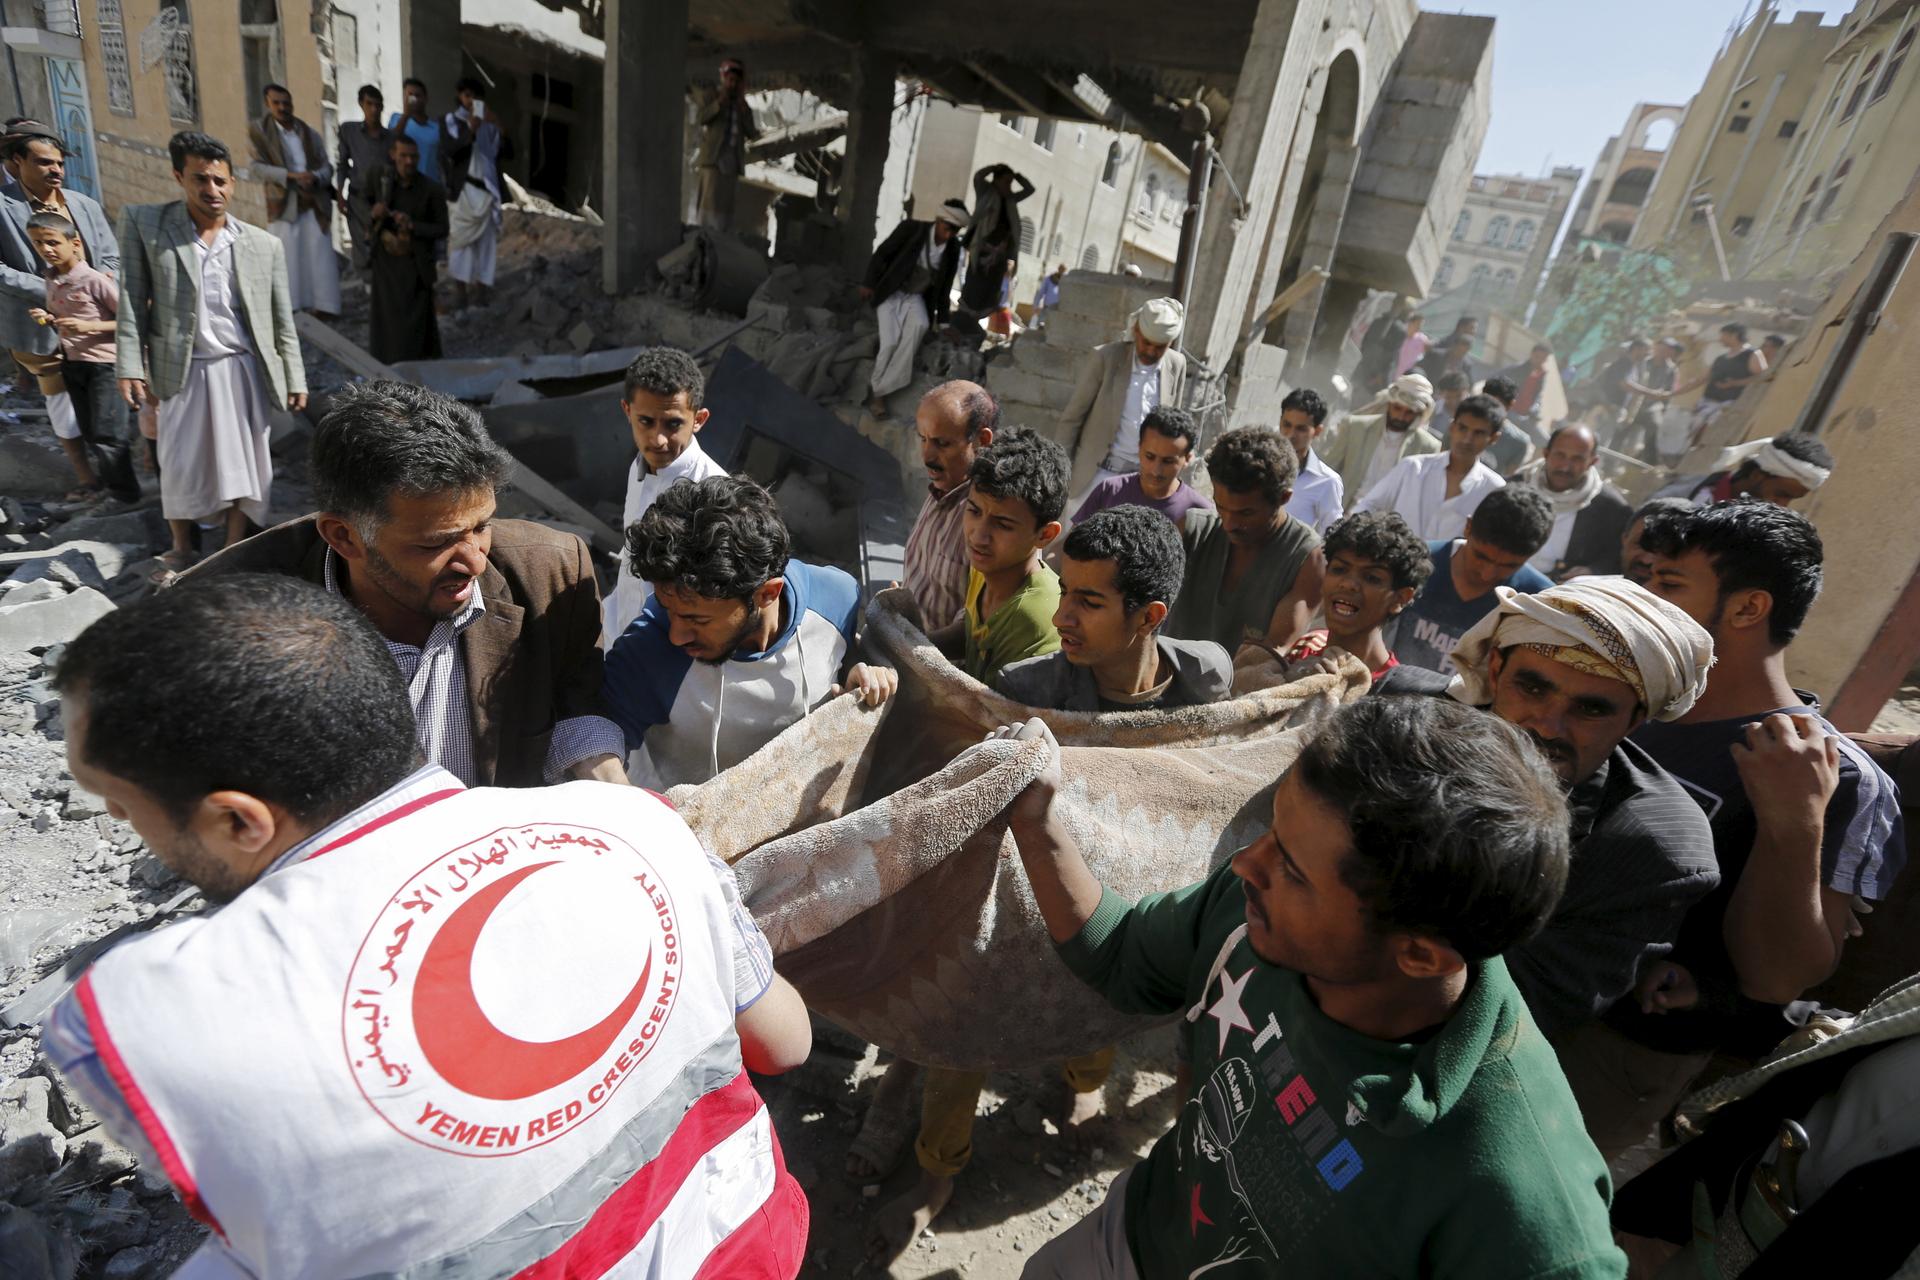 A medic and people carry the body of a boy following a Saudi-led air strike in Yemen's capital Sanaa September 22, 2015.